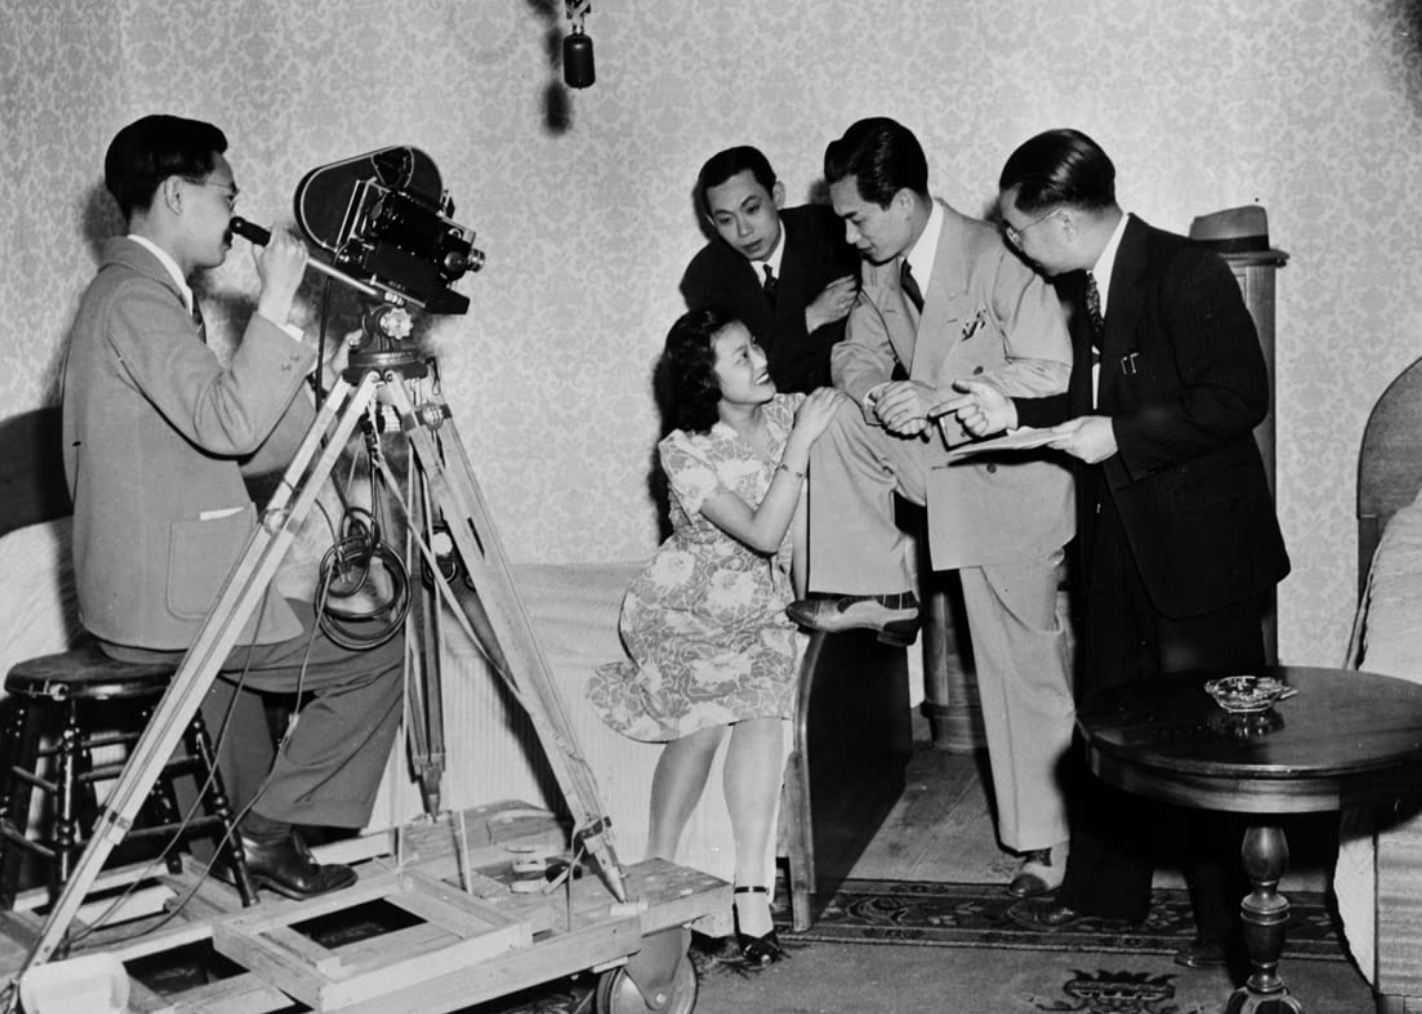 A scene from "Hollywood Chinese".